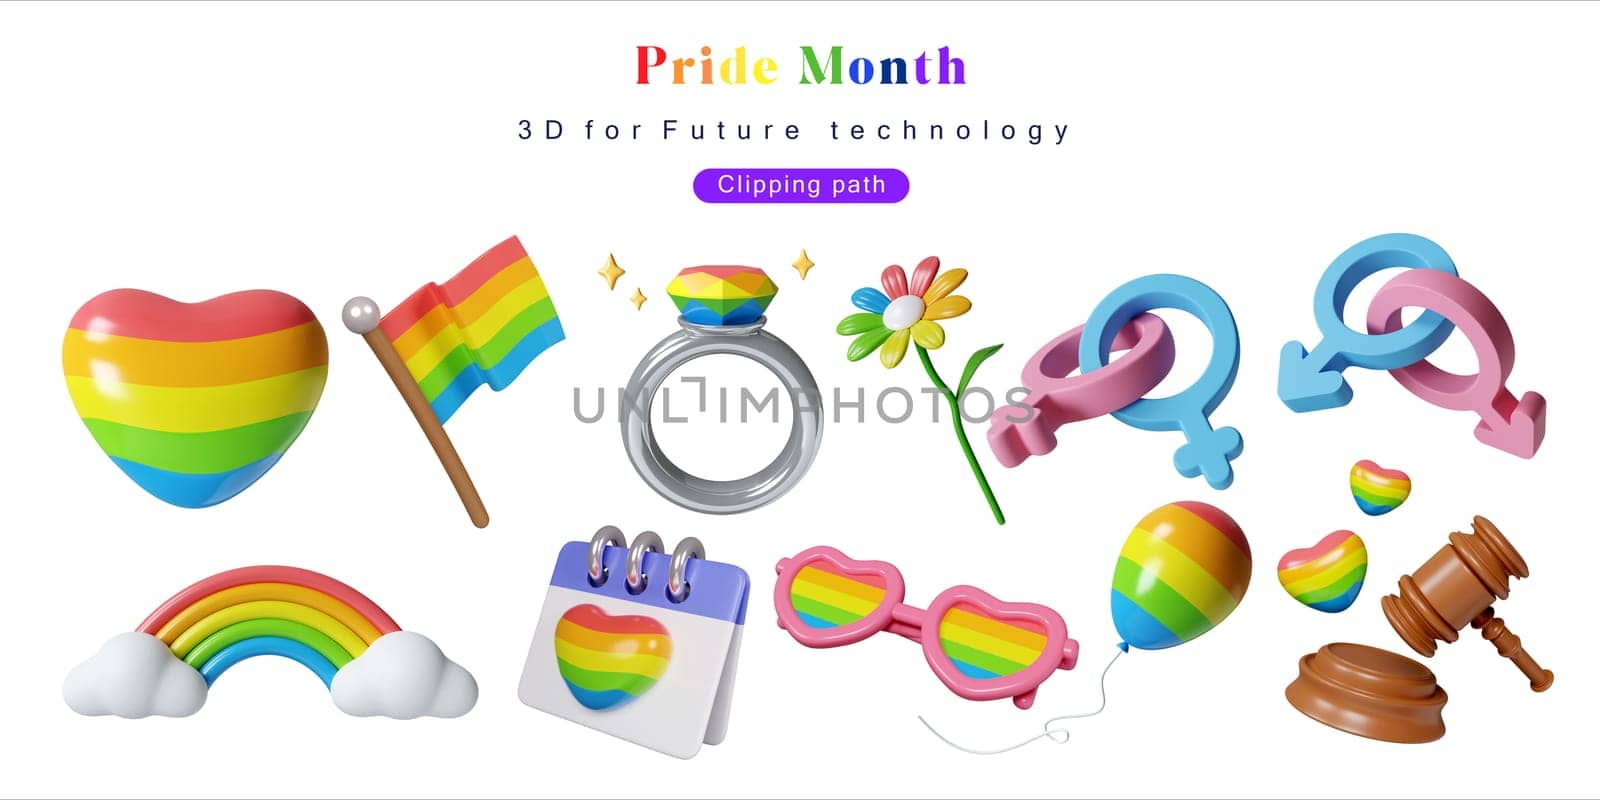 Pride day 3D icon set. rainbow, sunglasses, ring, balloon, heart shaped hand 3d rendering illustration by meepiangraphic